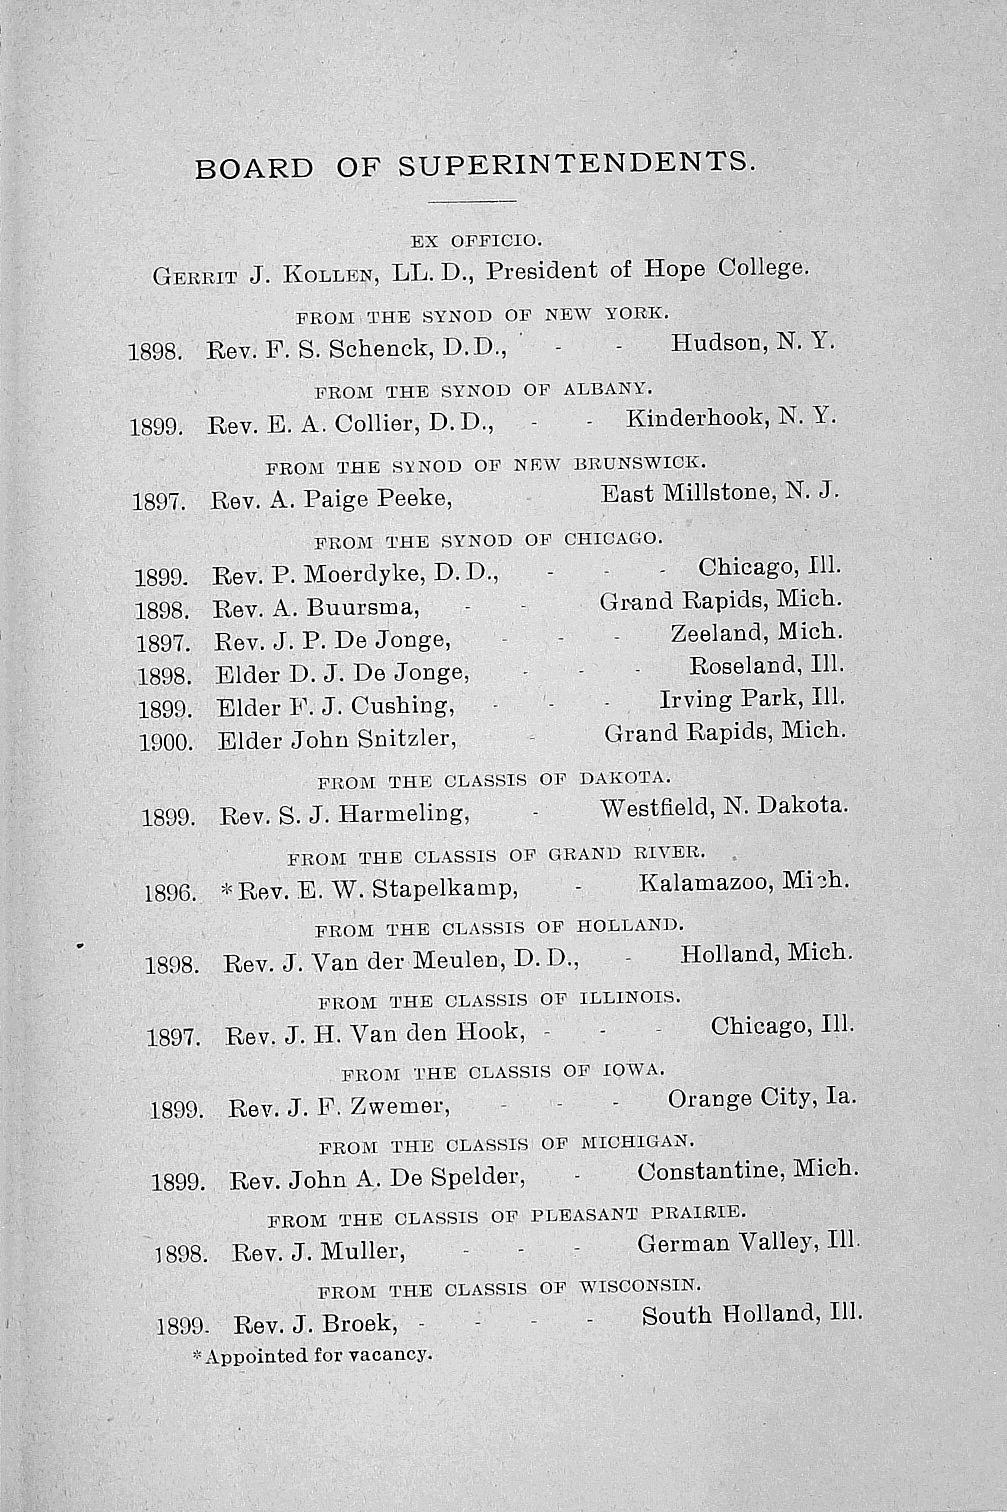 1899. Rev. BOARD OF SUPERINTENDENTS. EX OFFICIO. Gekkit J. Kollen, LL. D., President of Hope College. FROM THE SYNOD OF NEW YORK. 1898. Rev. F. S. Schenck, D.D., - - Hudson, N. Y. FROM THE SYNOD OF ALBANY.